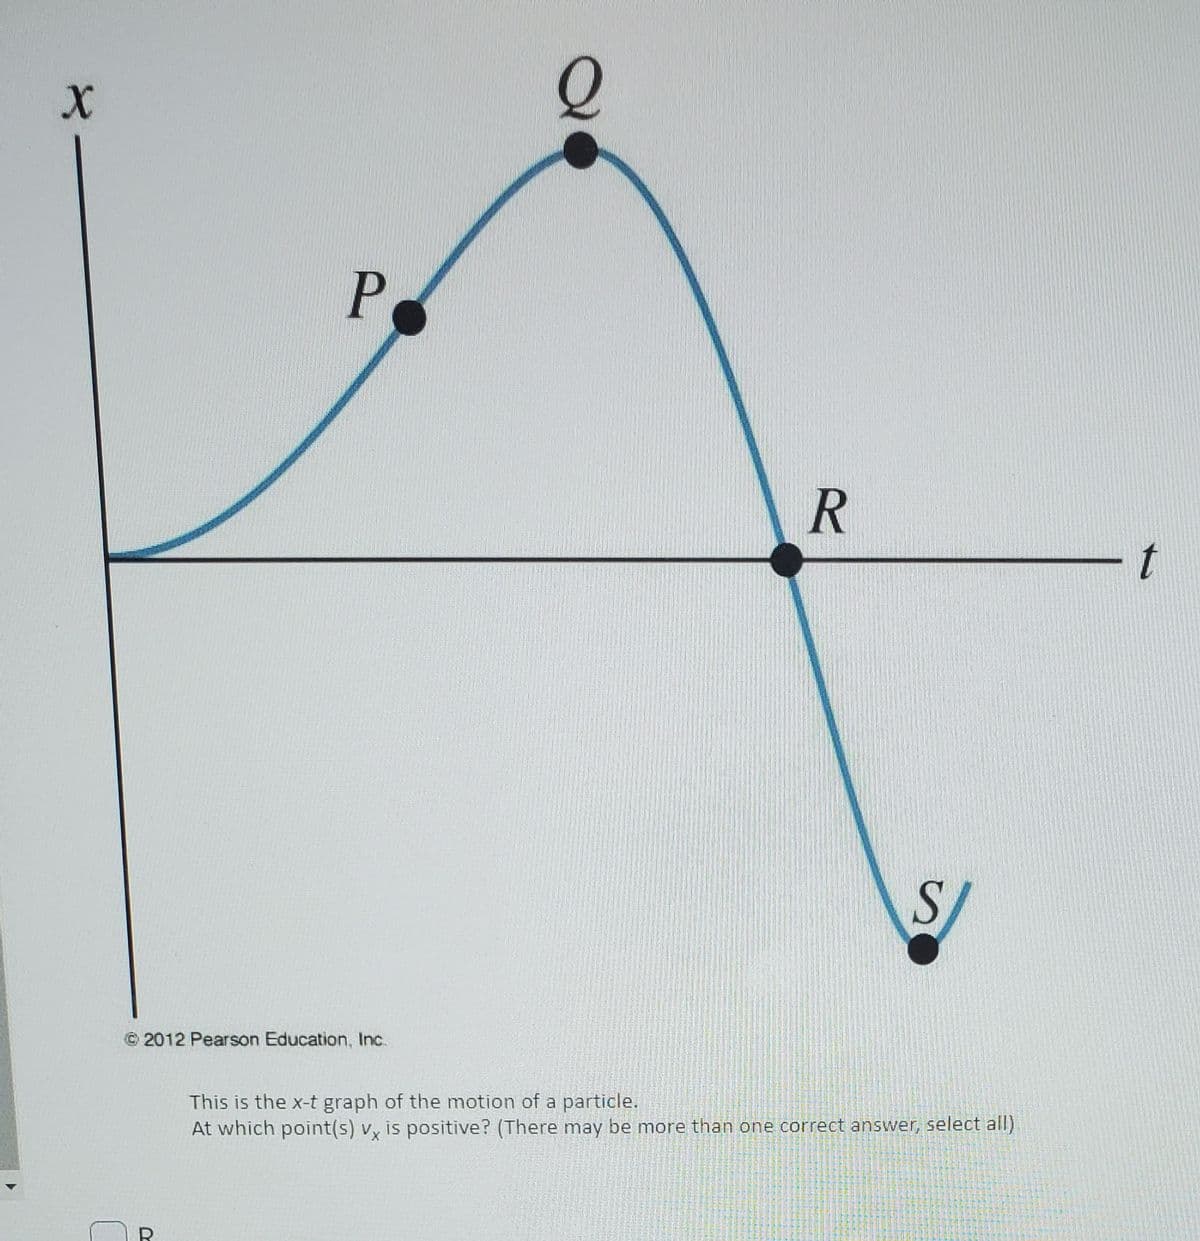 P.
t
© 2012 Pearson Education, Inc.
This is the x-t graph of the motion of a particle.
At which point(s) v, is positive? (There may be more than one correct answer, select all)
